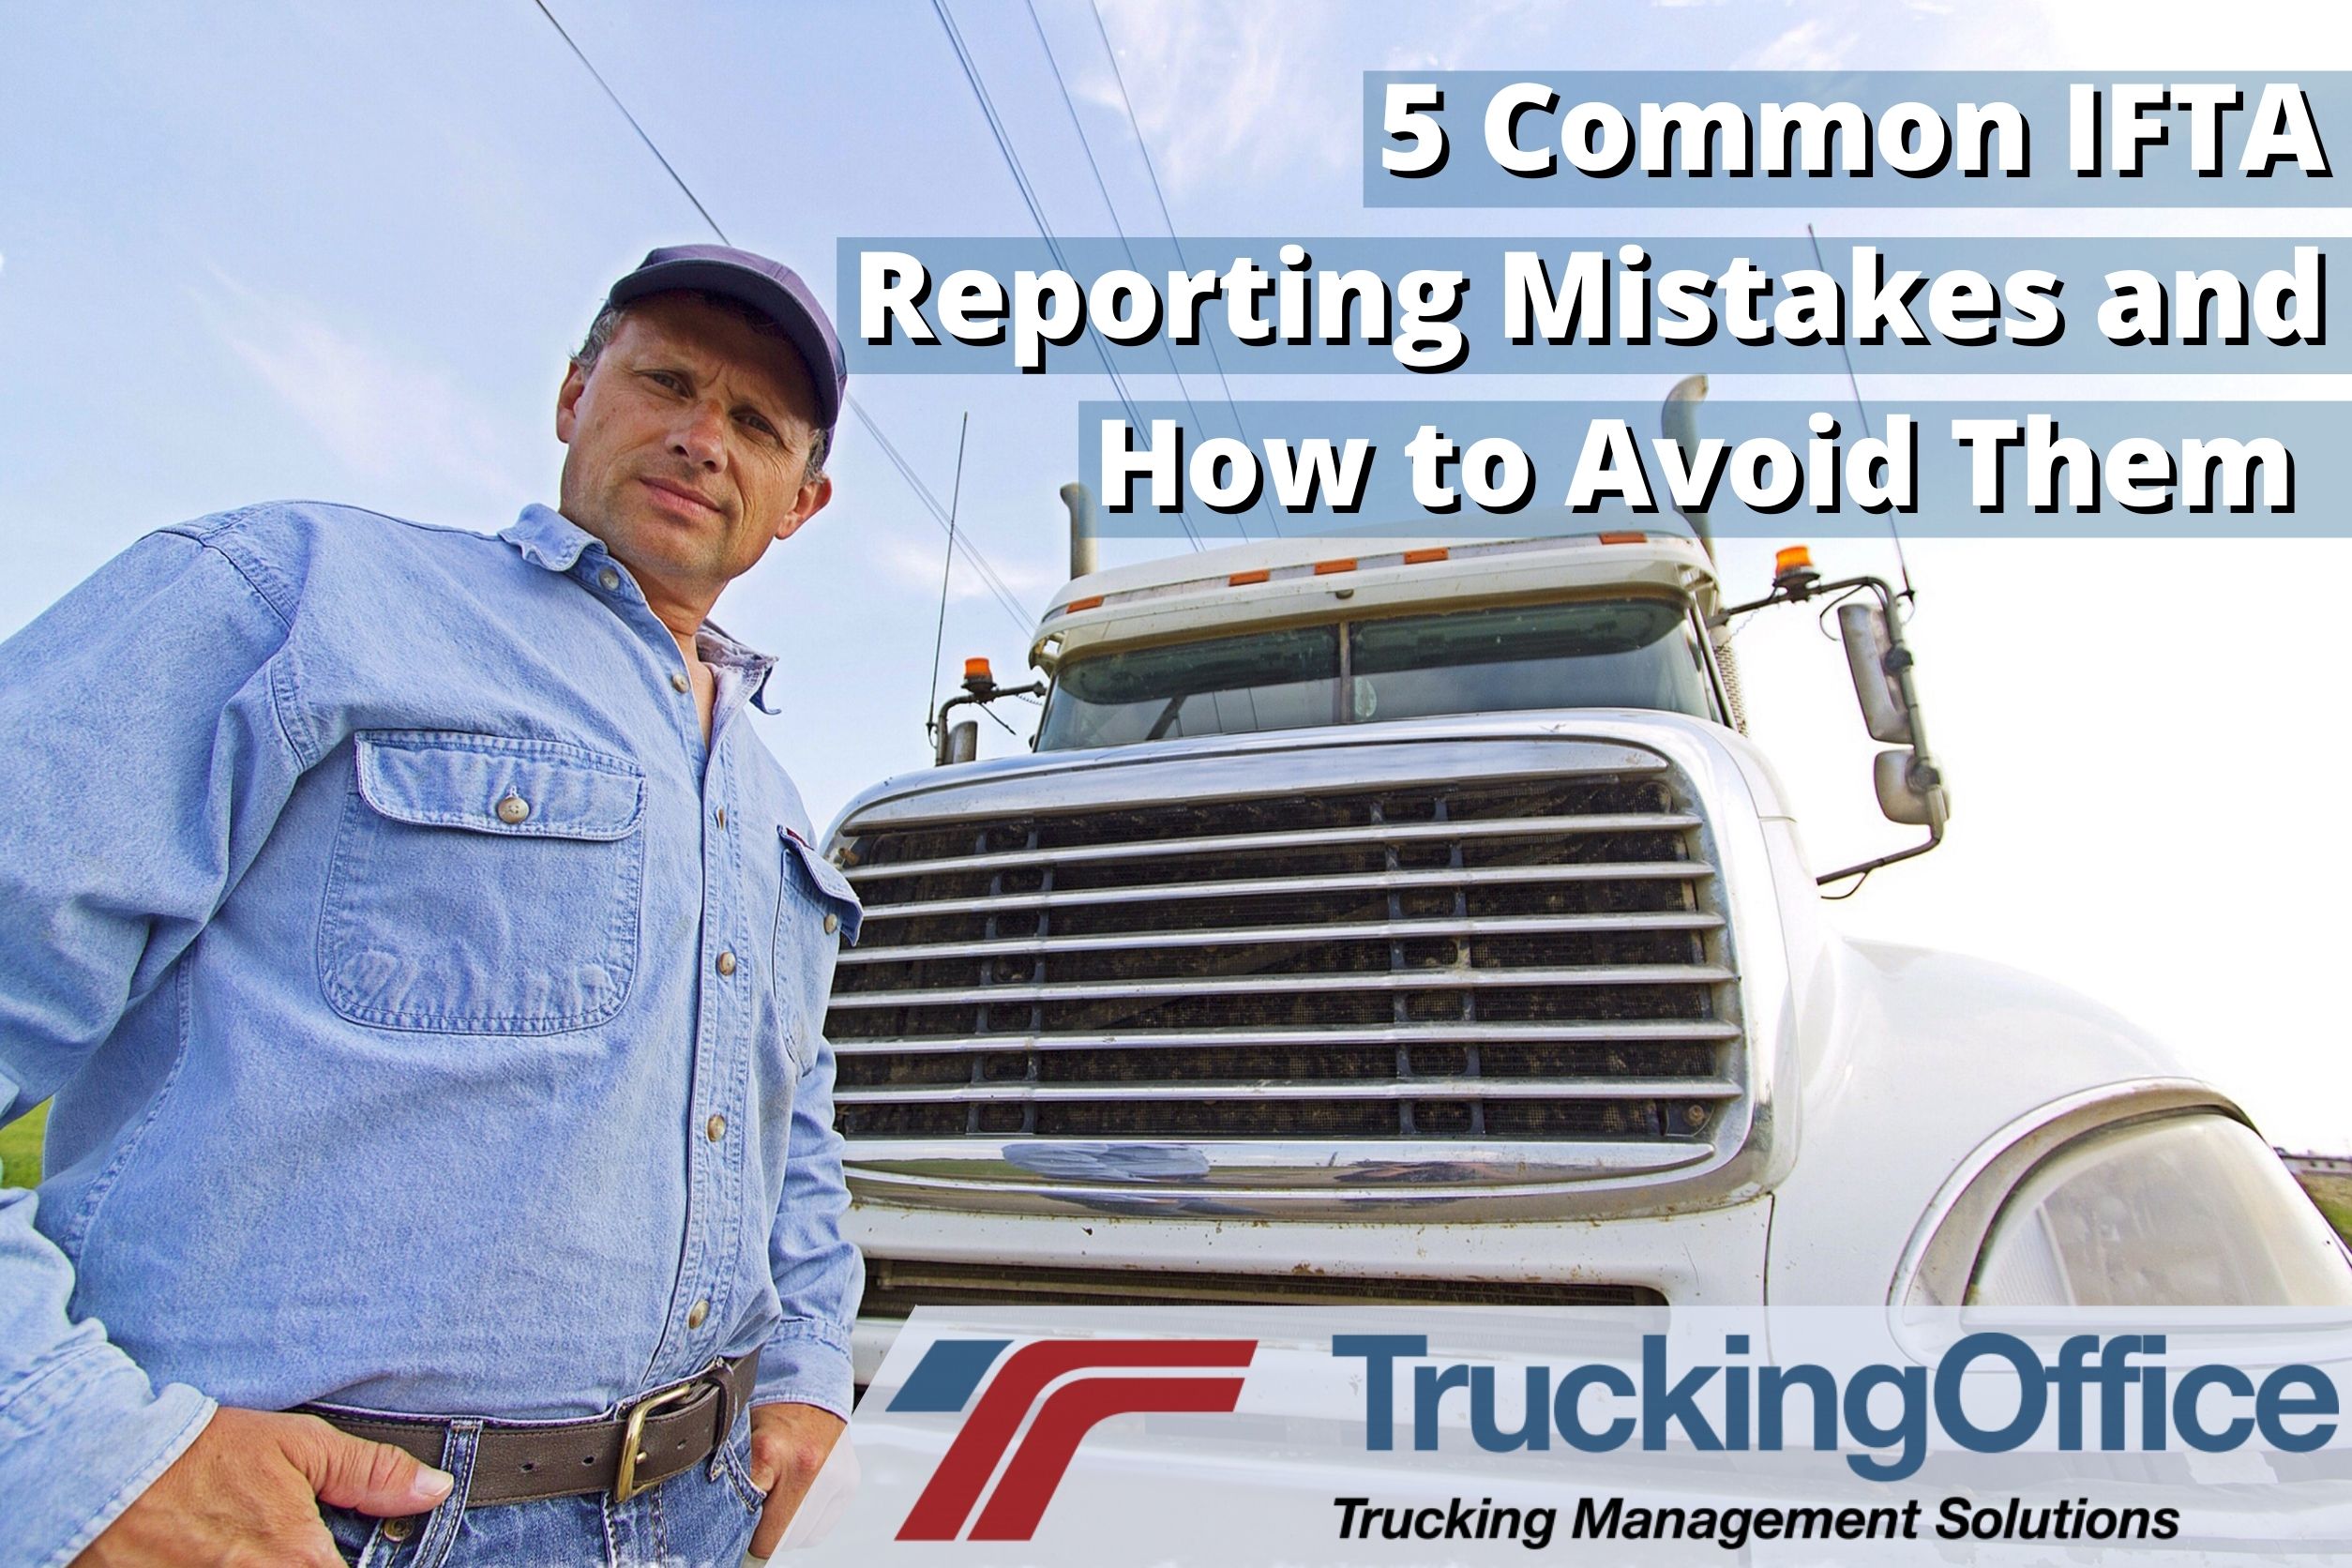 5 Common IFTA Reporting Mistakes and How to Avoid Them